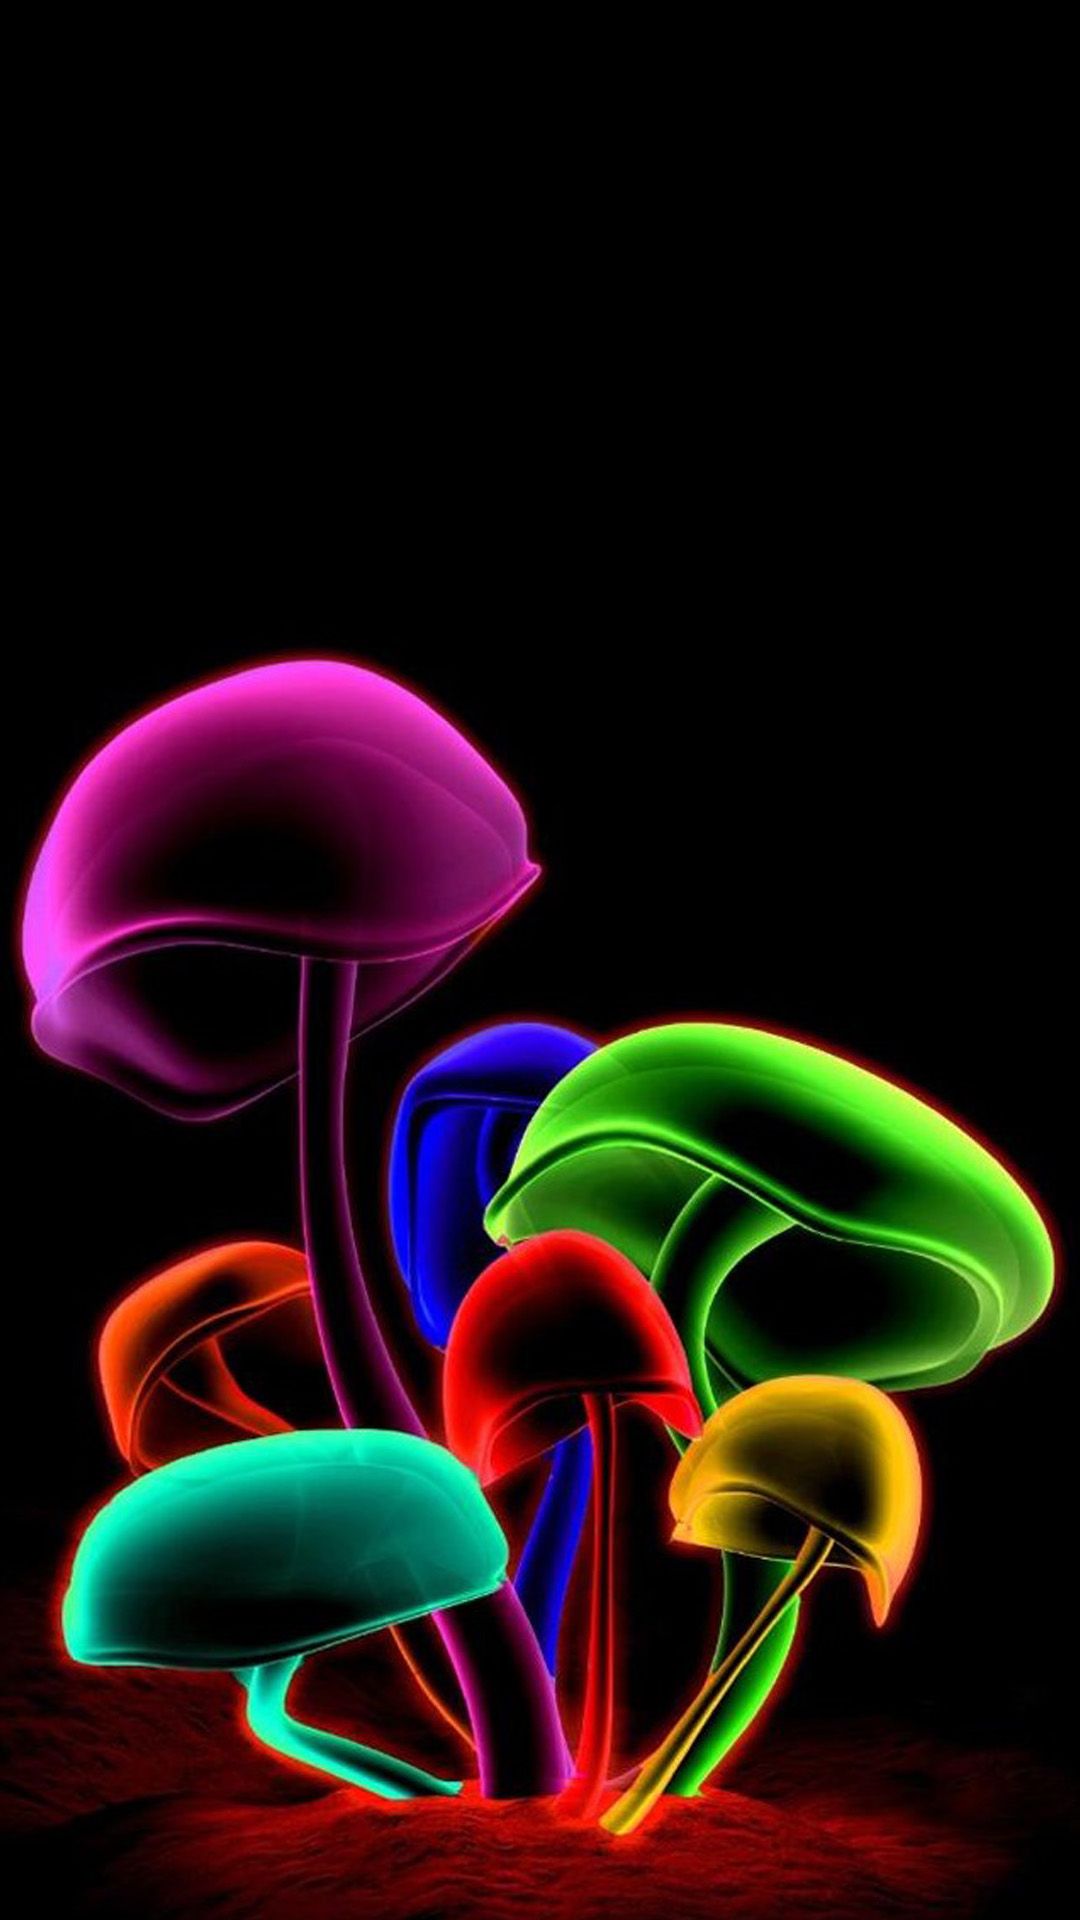 A group of colorful mushrooms on black background - 3D